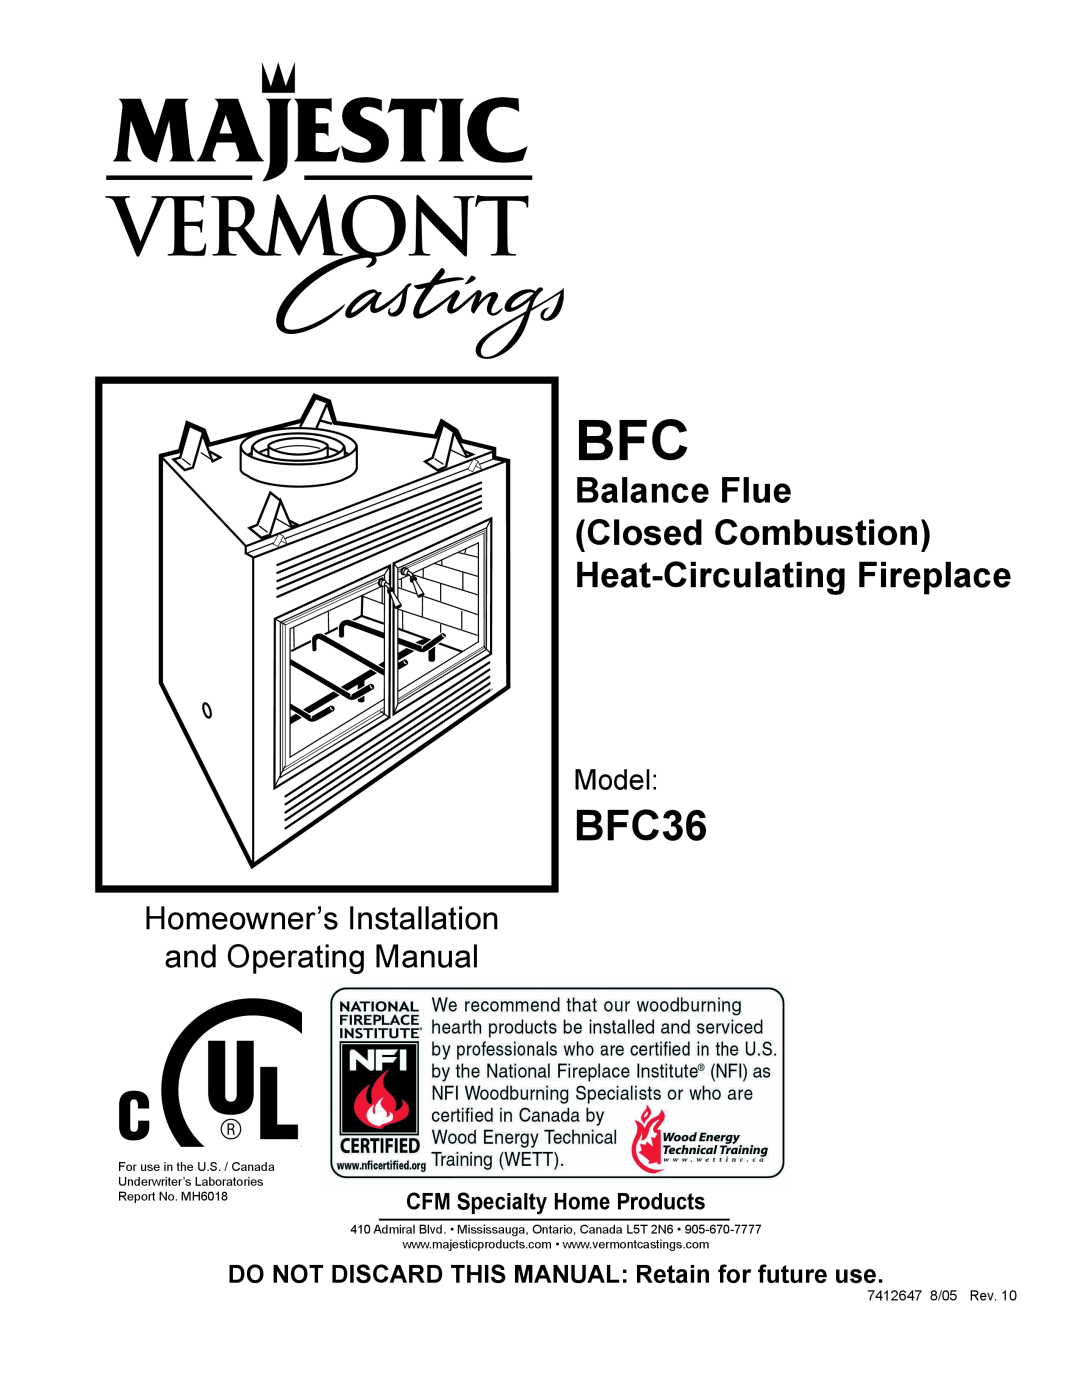 Vermont Casting 647 BFC manual BFC36, CFM Specialty Home Products, Balance Flue Closed Combustion, Model 